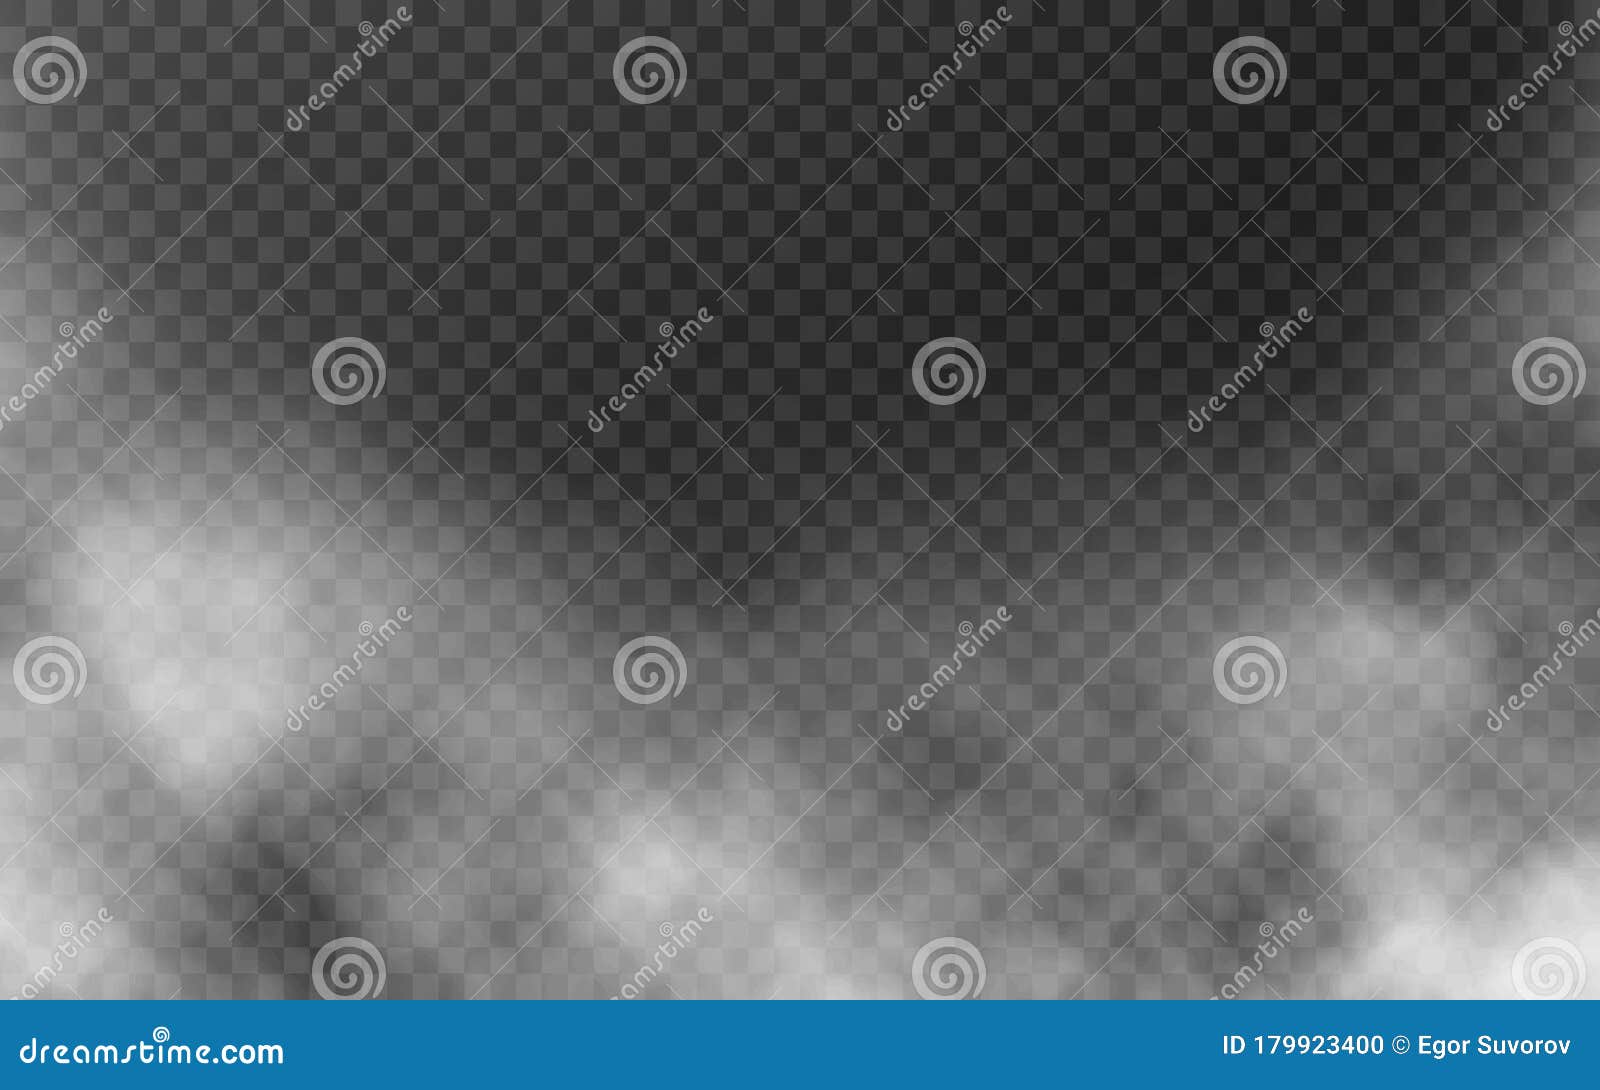 download free fog clipart